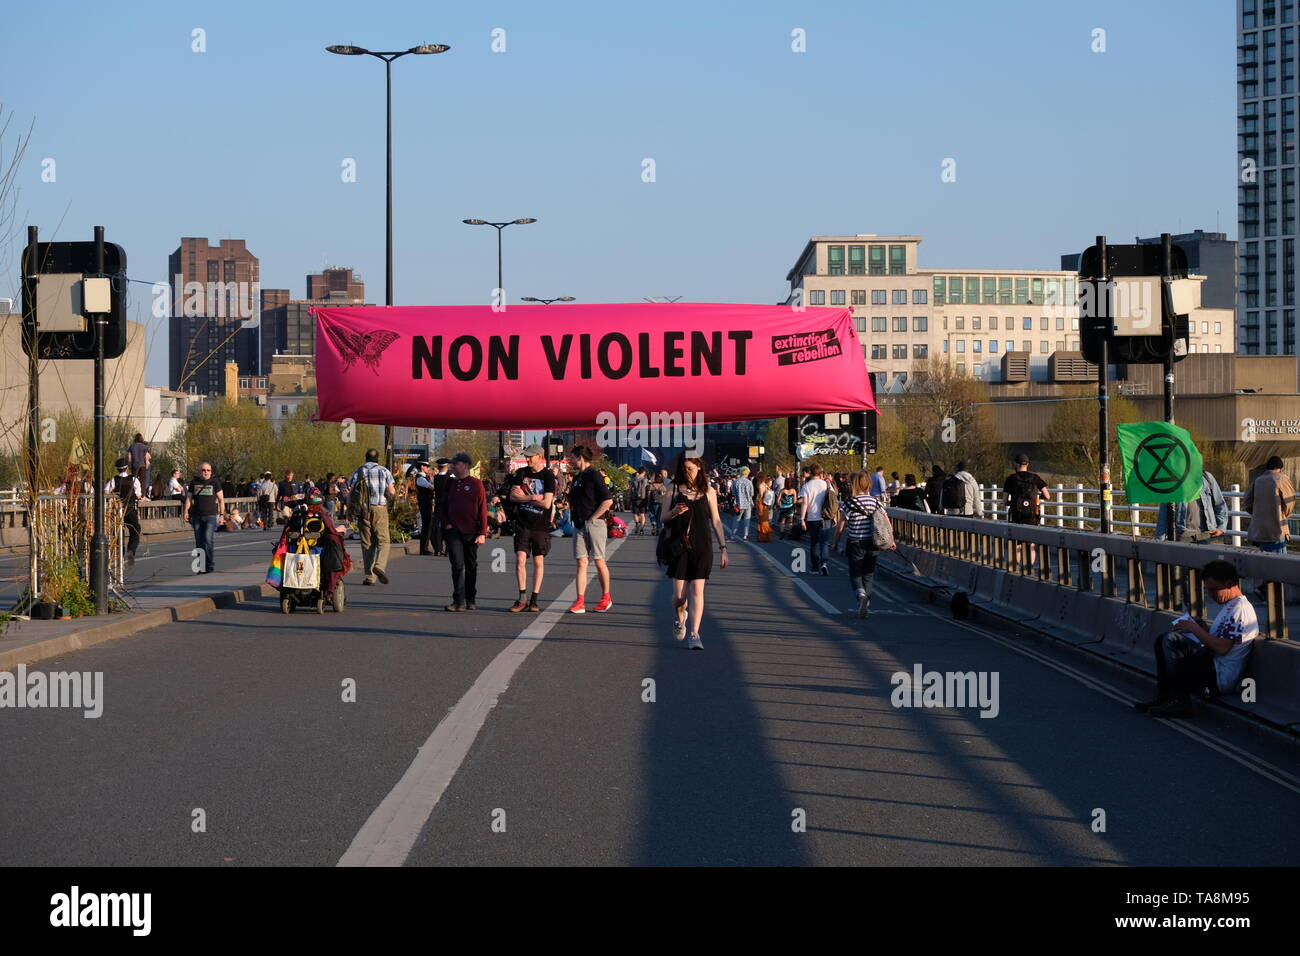 Extinction Rebellion 'Non Violent' banner stretched across activist occupied Waterloo Bridge during sixth day of protest Stock Photo